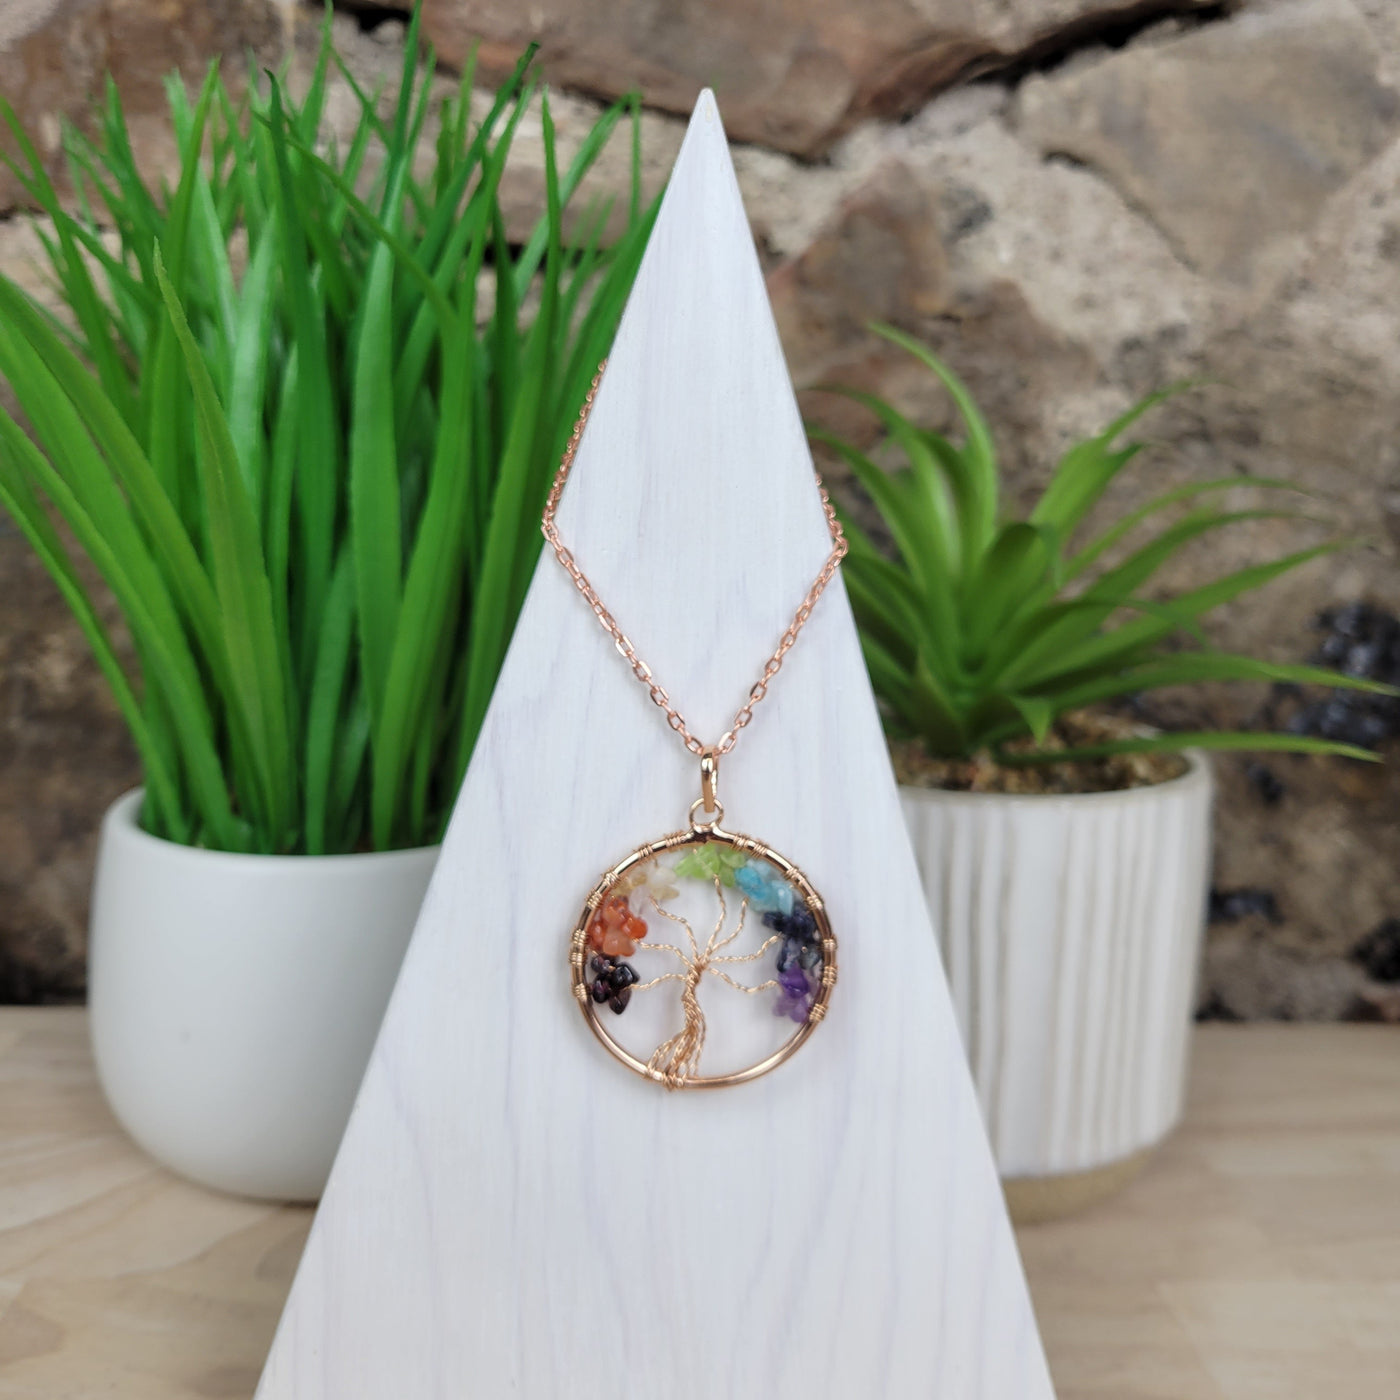 Tree Life Quartz Crystal Healing Crystal Necklace Set Chakra Gemstone  Pendant In Copper And Silver Wire Wrap From Hu0822, $14.24 | DHgate.Com